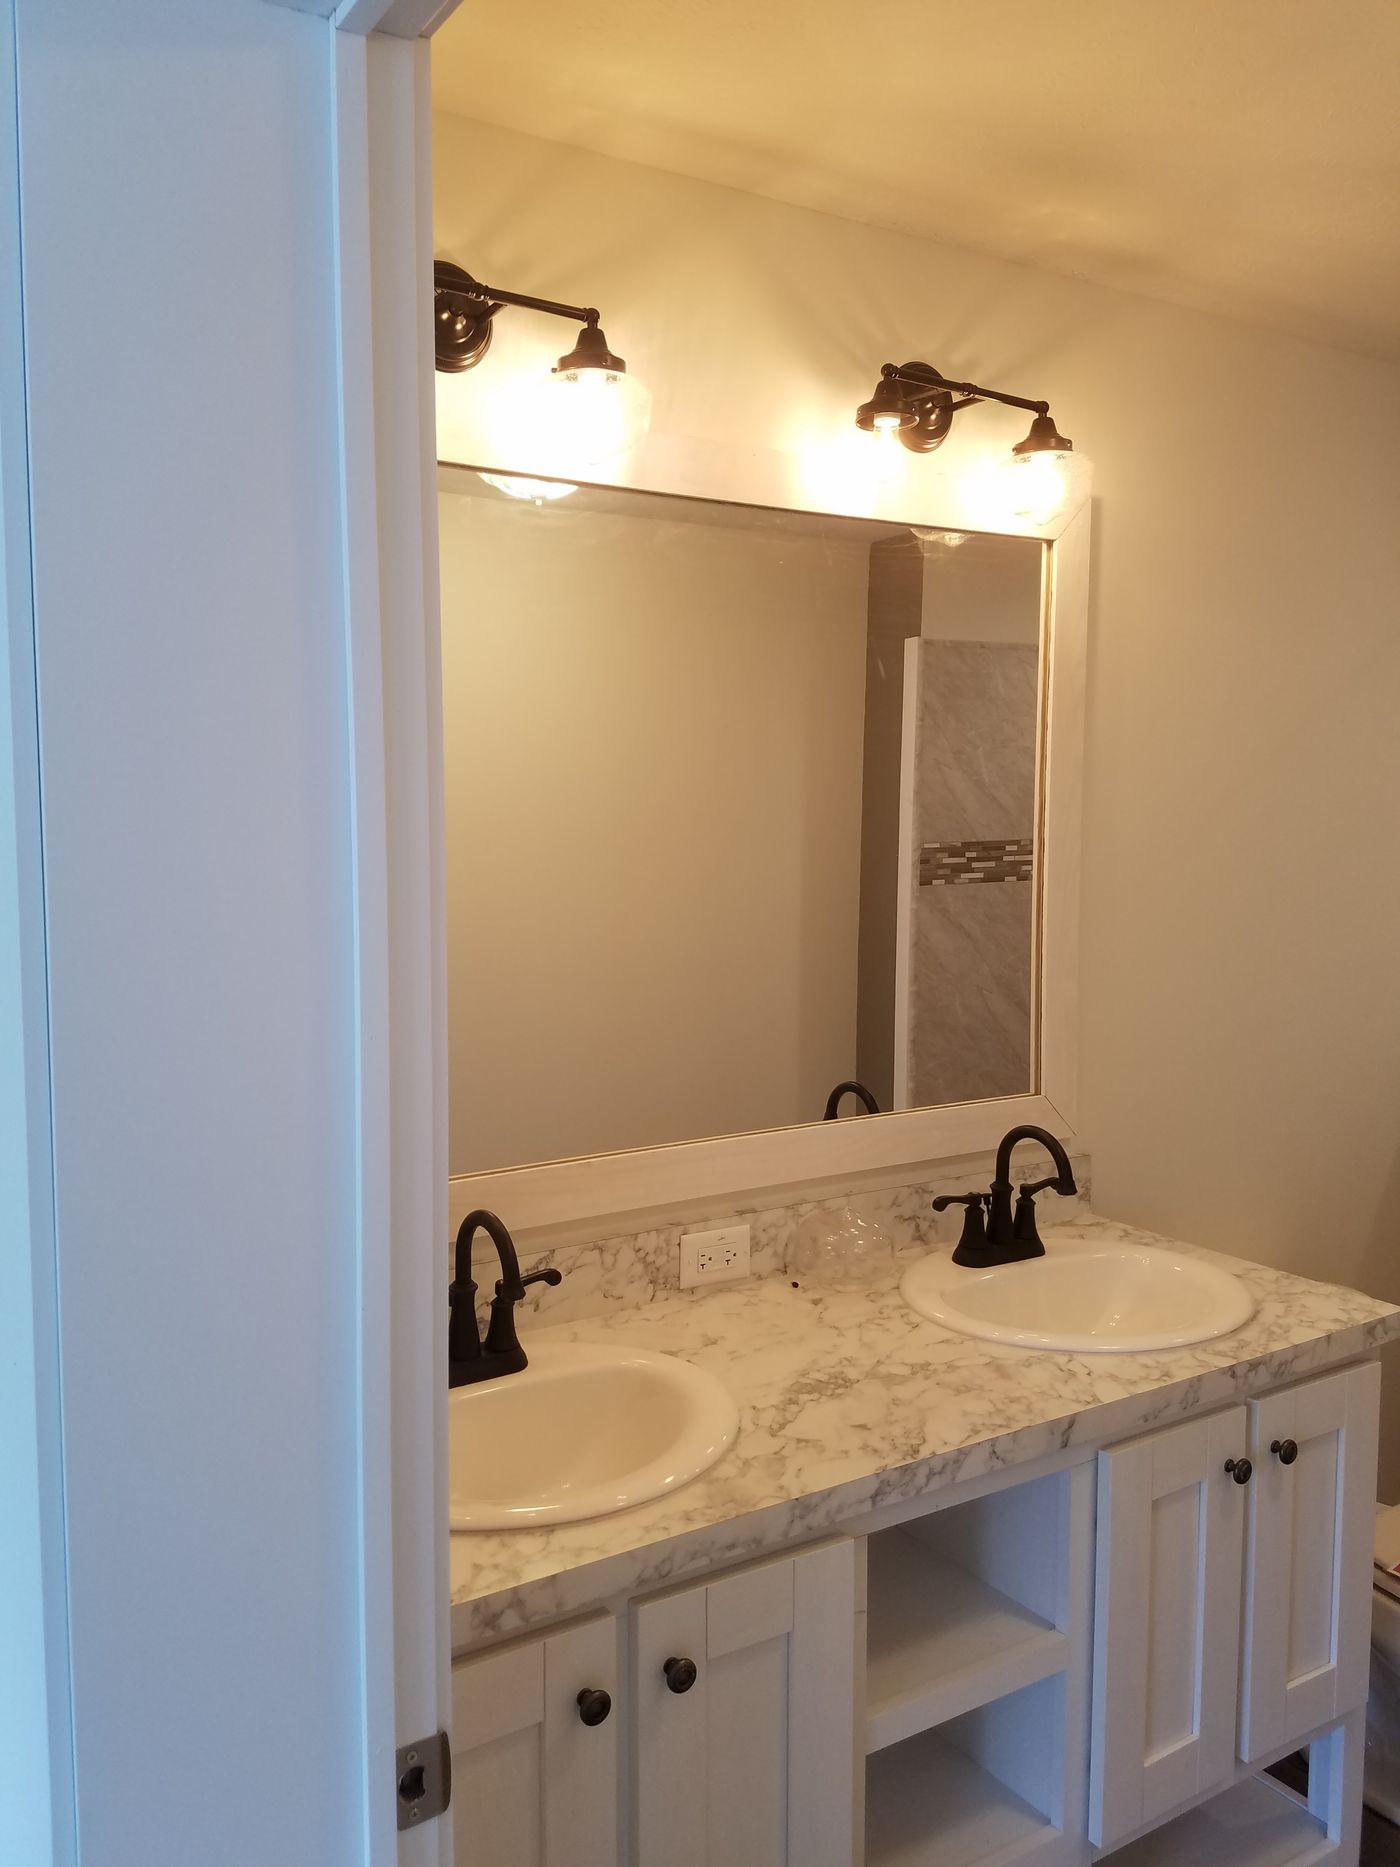 The ELM ST 5628-MS018 SECT Primary Bathroom. This Manufactured Mobile Home features 3 bedrooms and 2 baths.